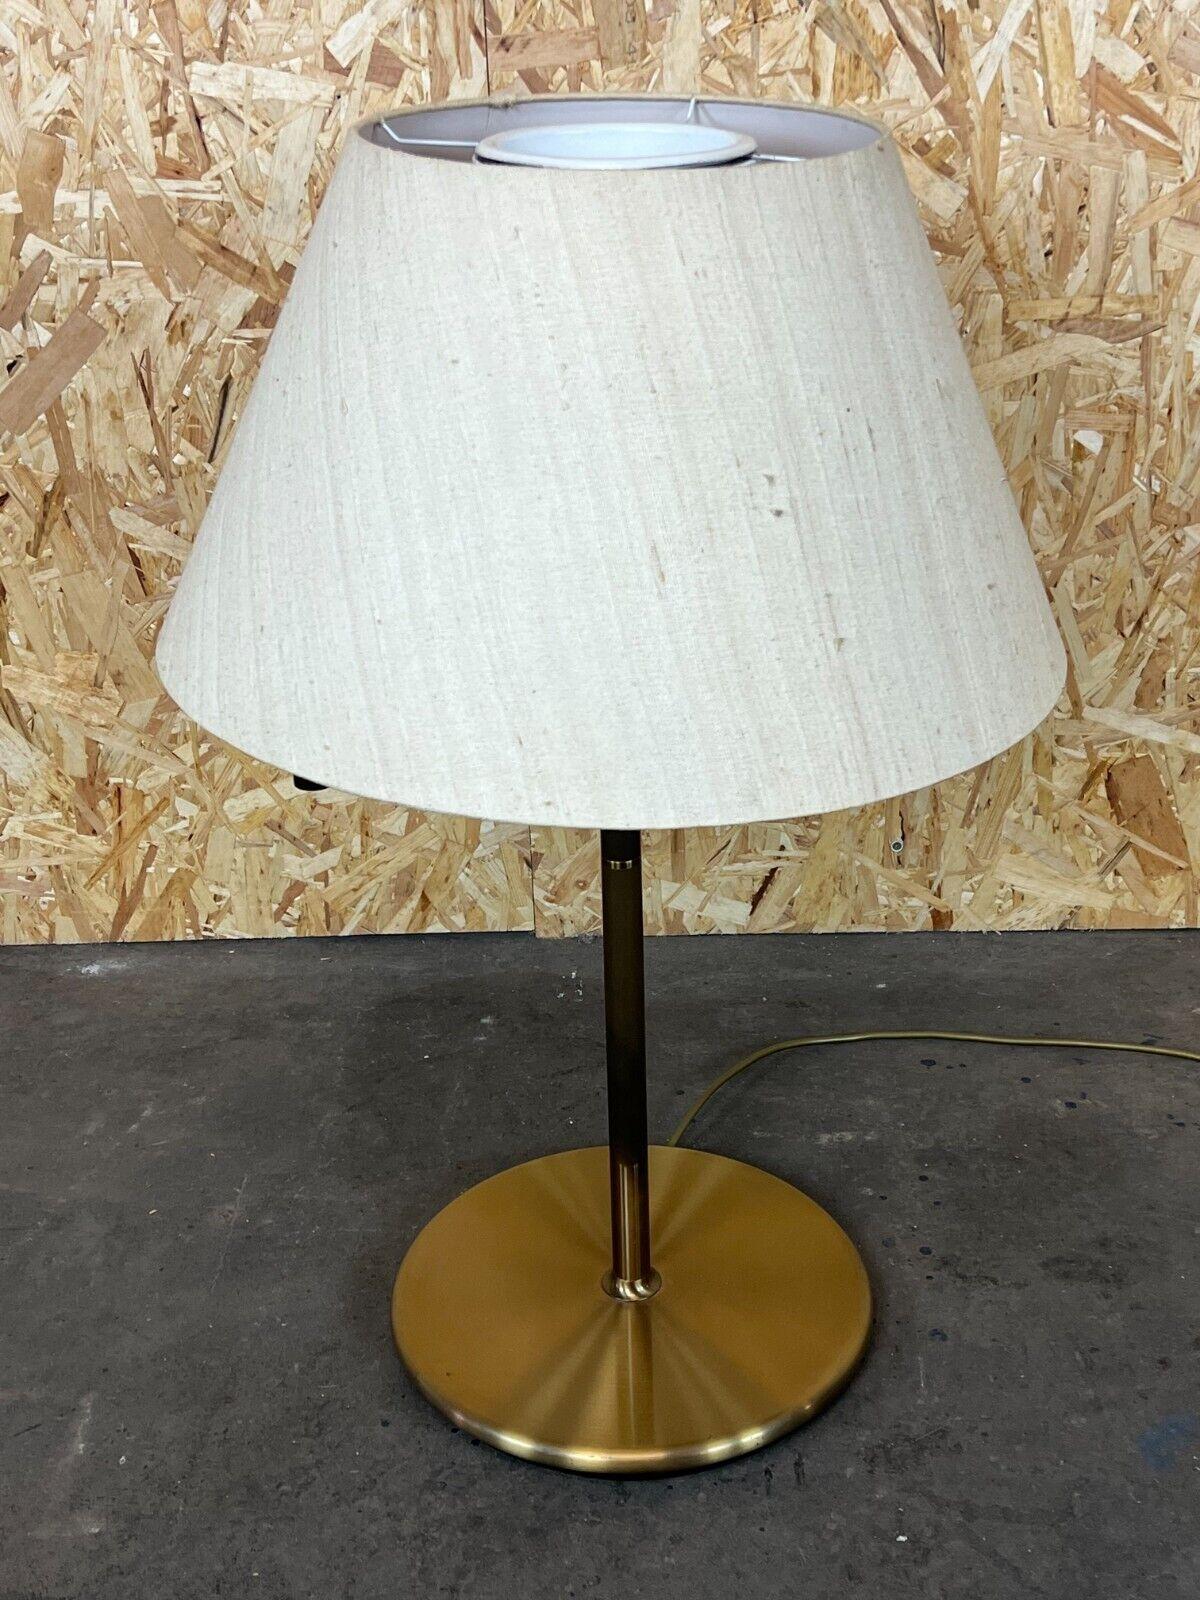 60s 70s Lamp Light Table Lamp Brass Swivel Space Age Design In Good Condition For Sale In Neuenkirchen, NI